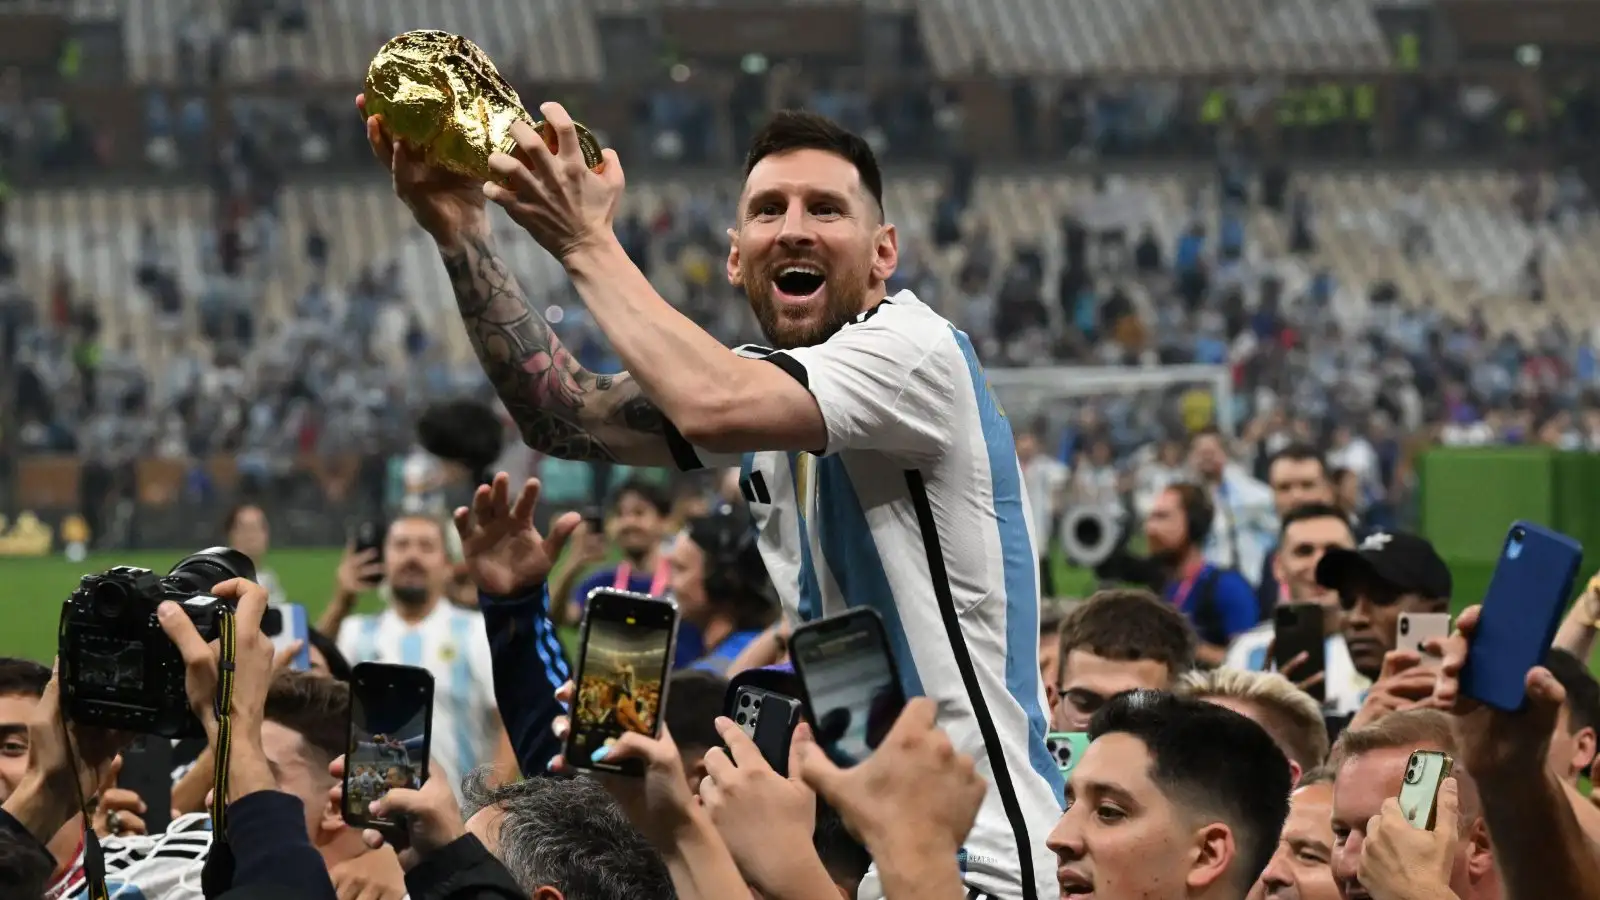 Lionel Messi is the GOAT who won the World Cup